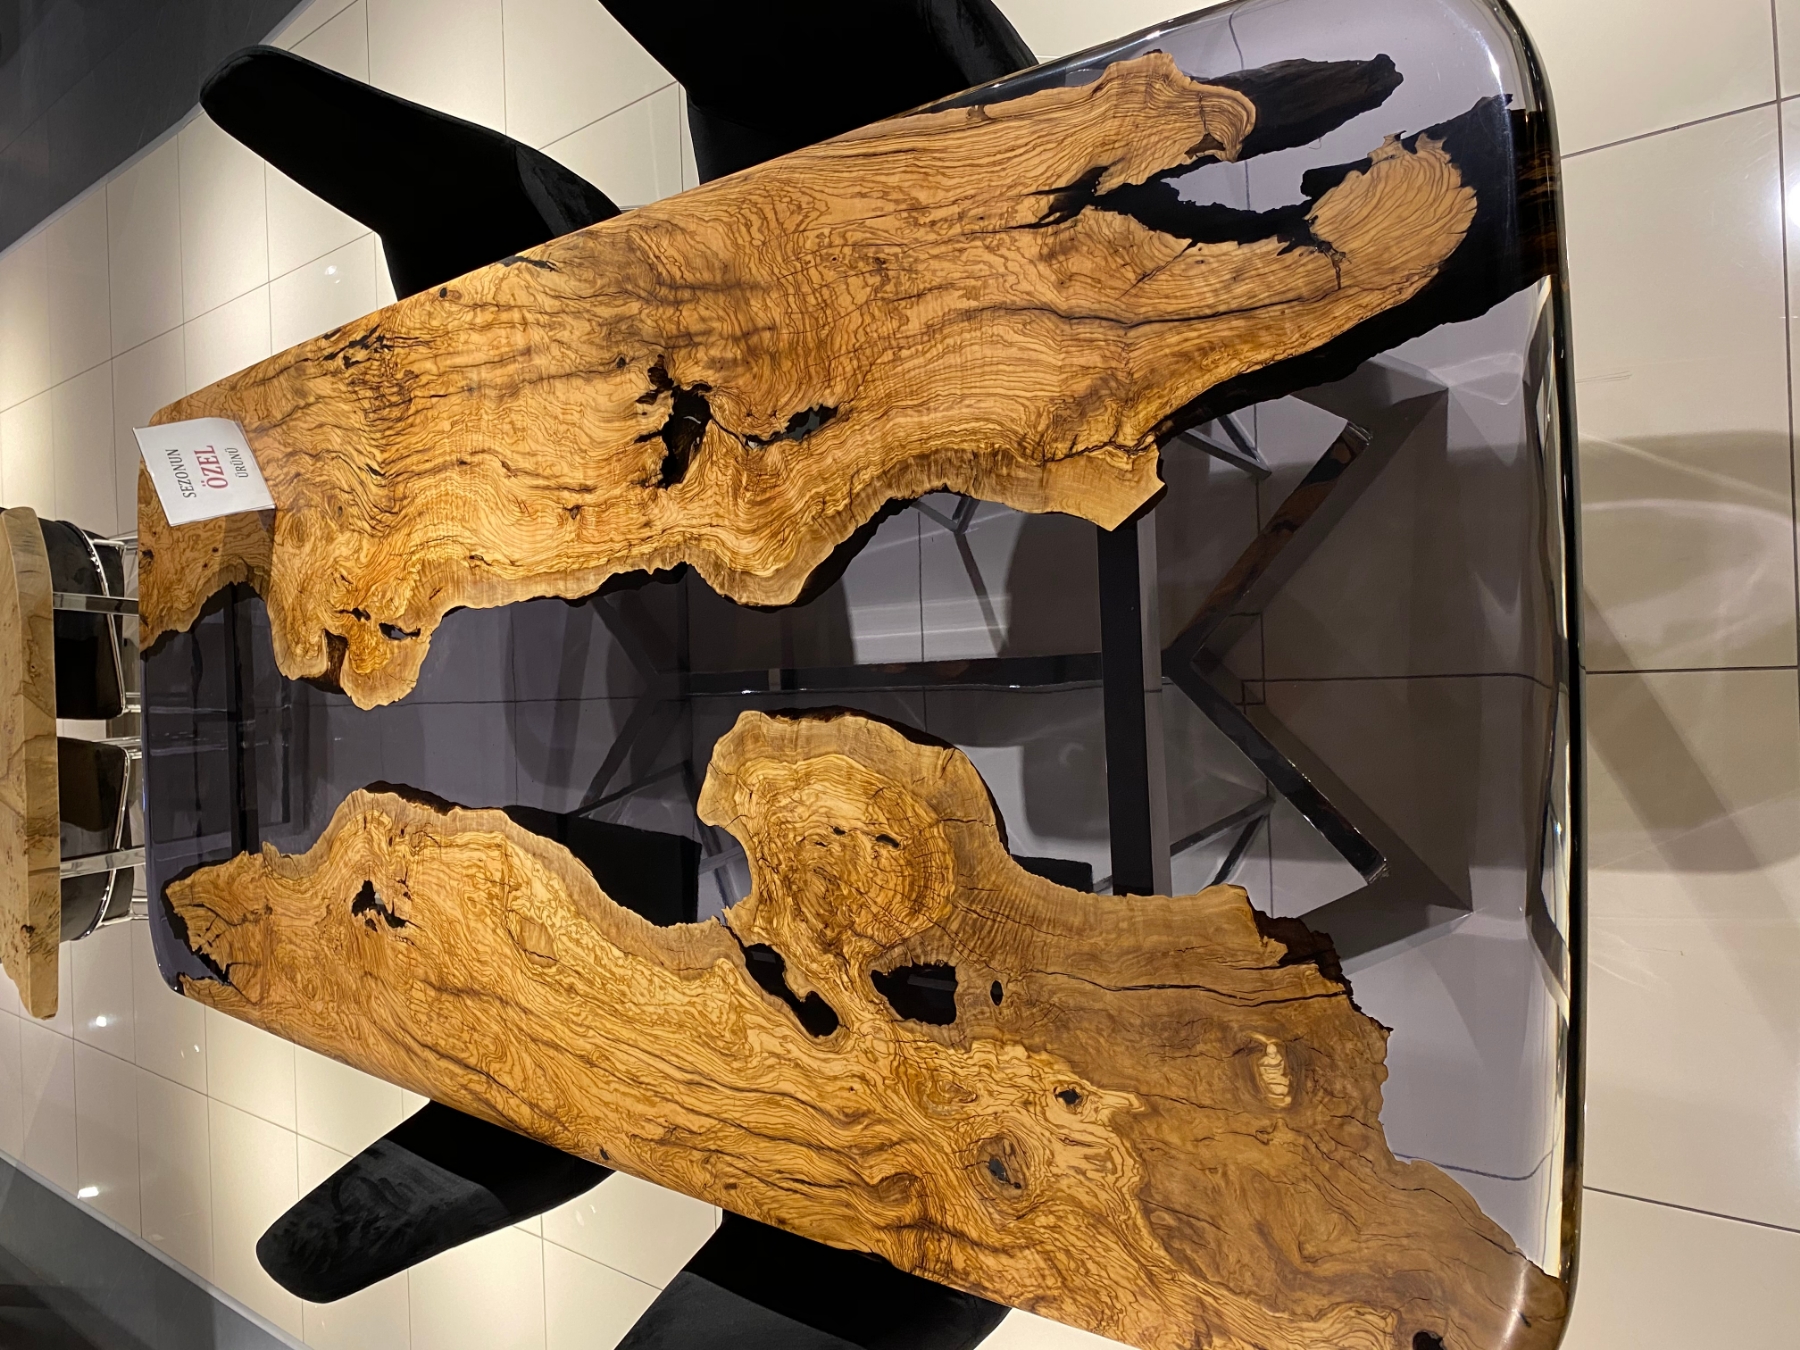 Picture of Olive  Wood Epoxy Table